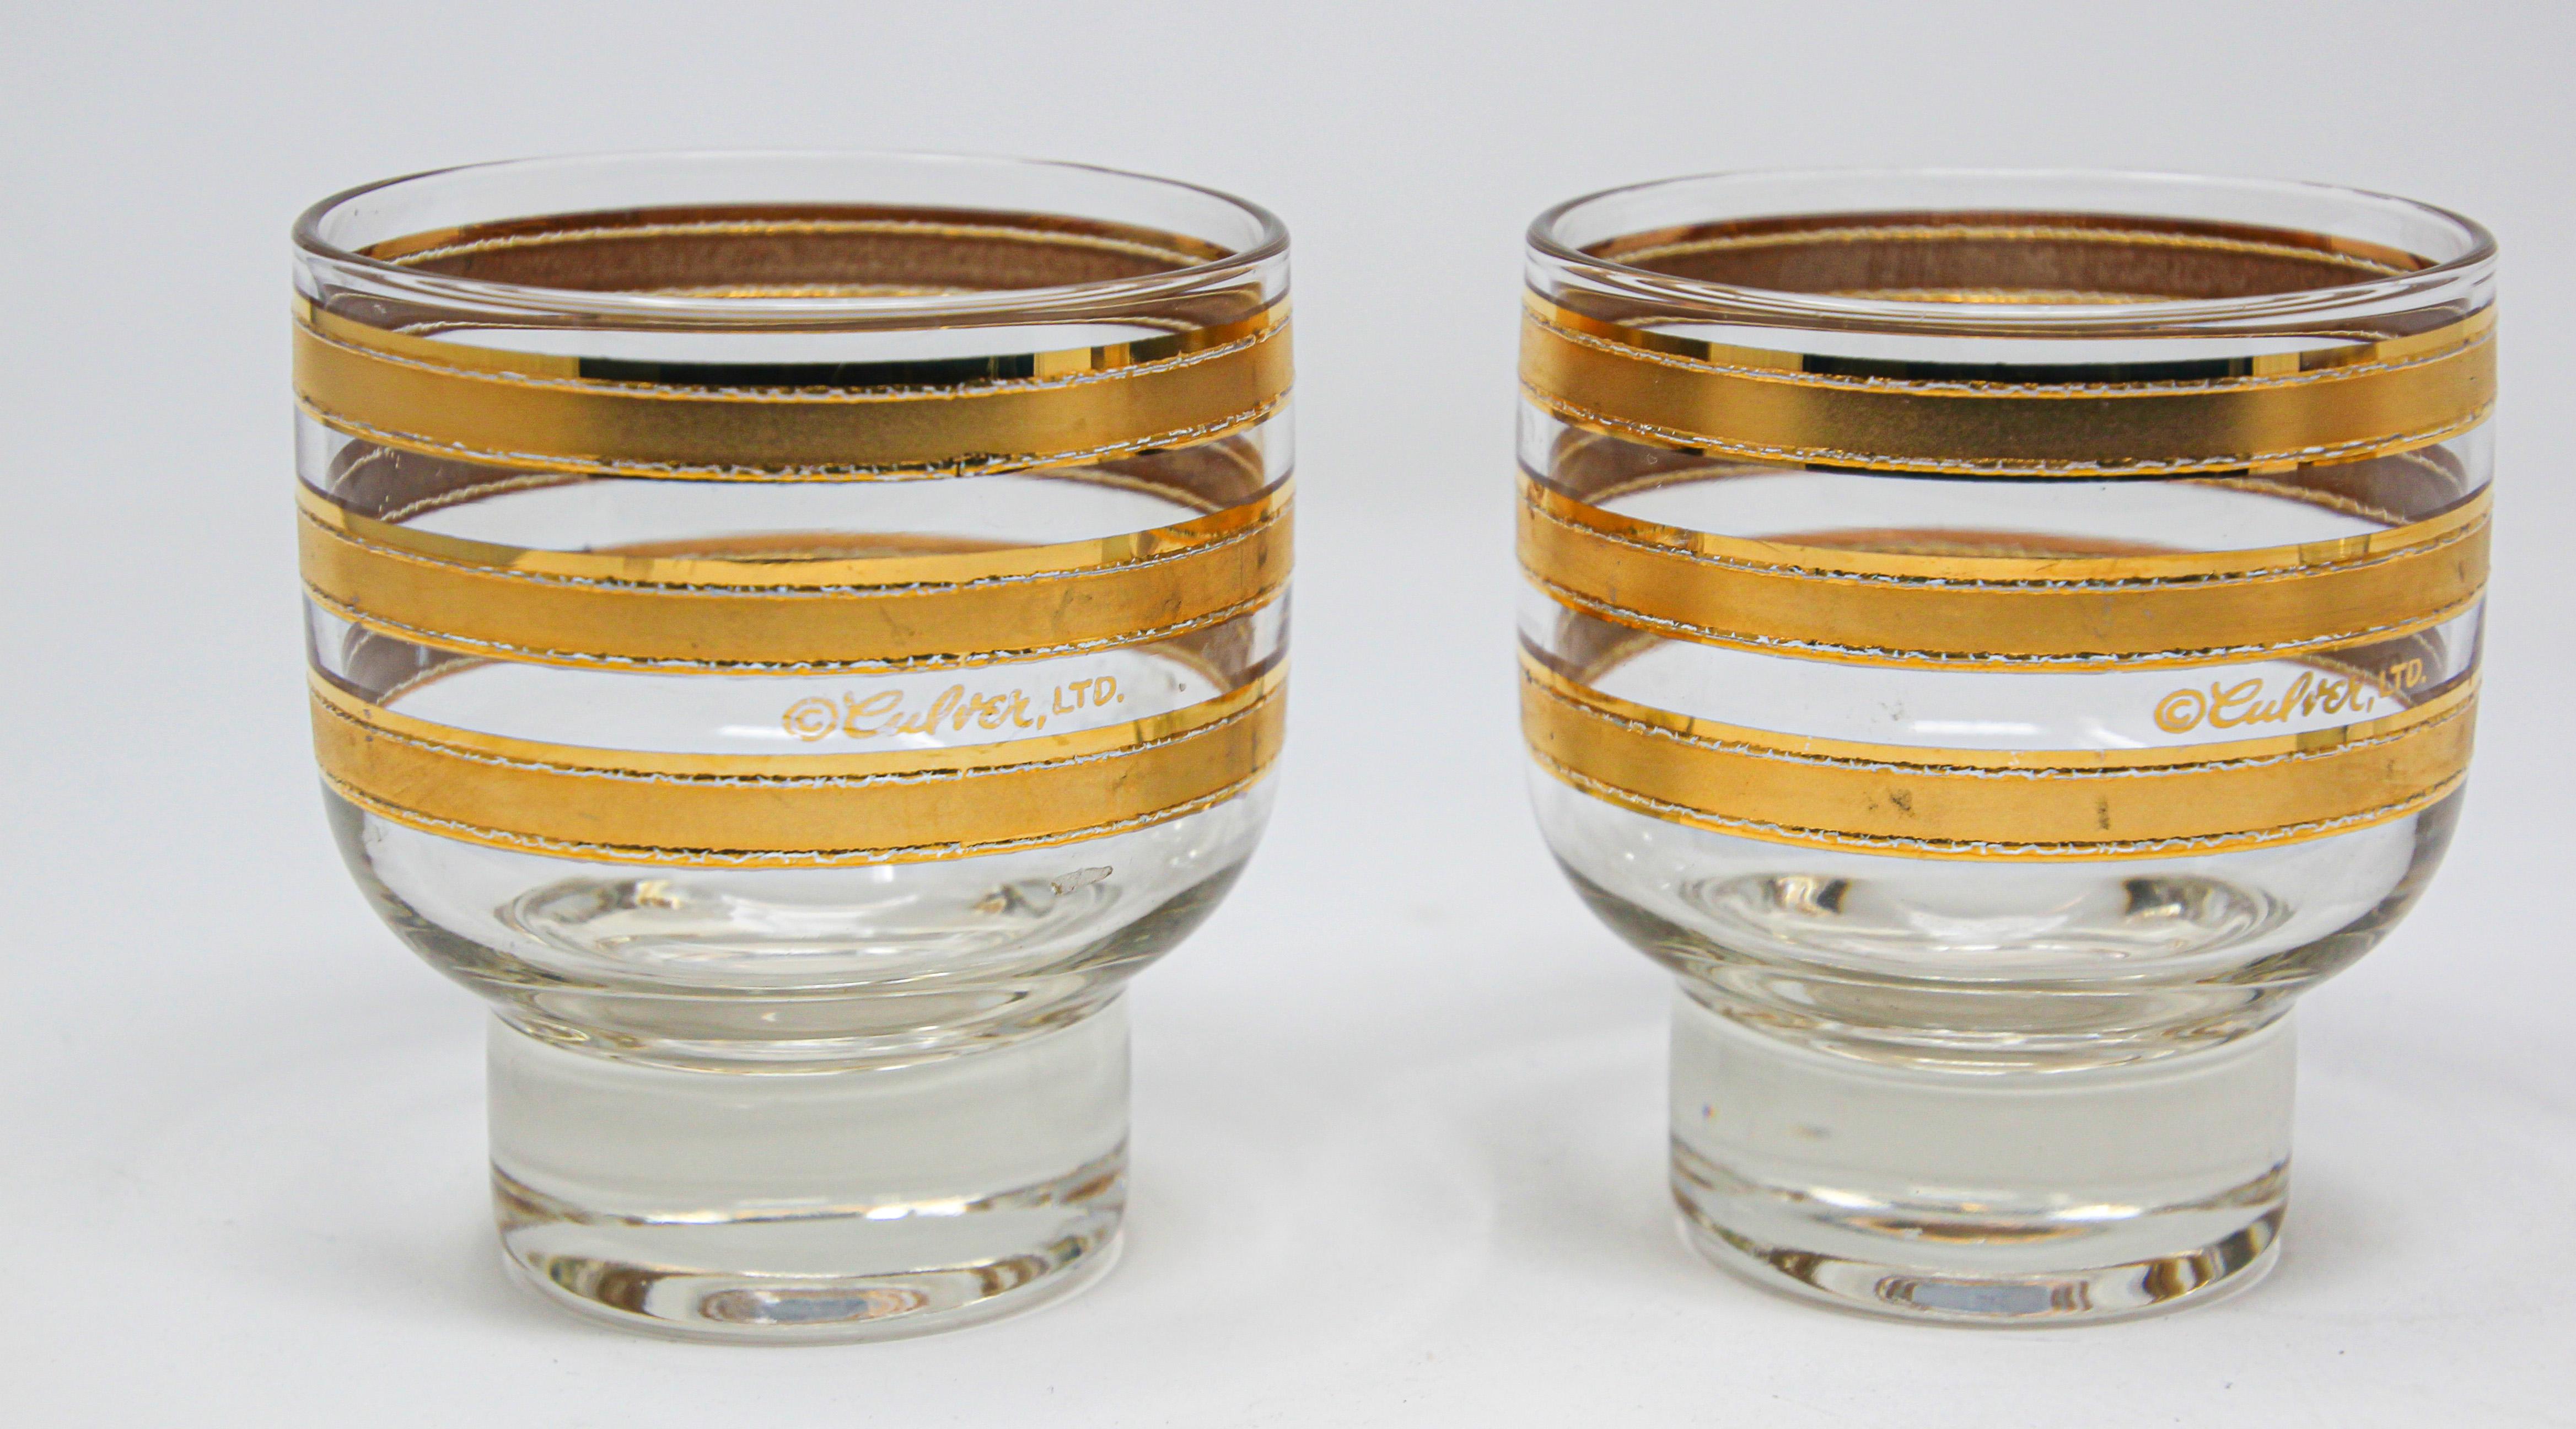 Vintage midcentury Culver barware glasses with gold leaf finish.
Set includes 3 Culver midcentury vintage 22-karat. Gold footed rocks glasses
Signed Culver.
A perfect set for your home bar or bar cart! A fabulous and rare find of midcentury